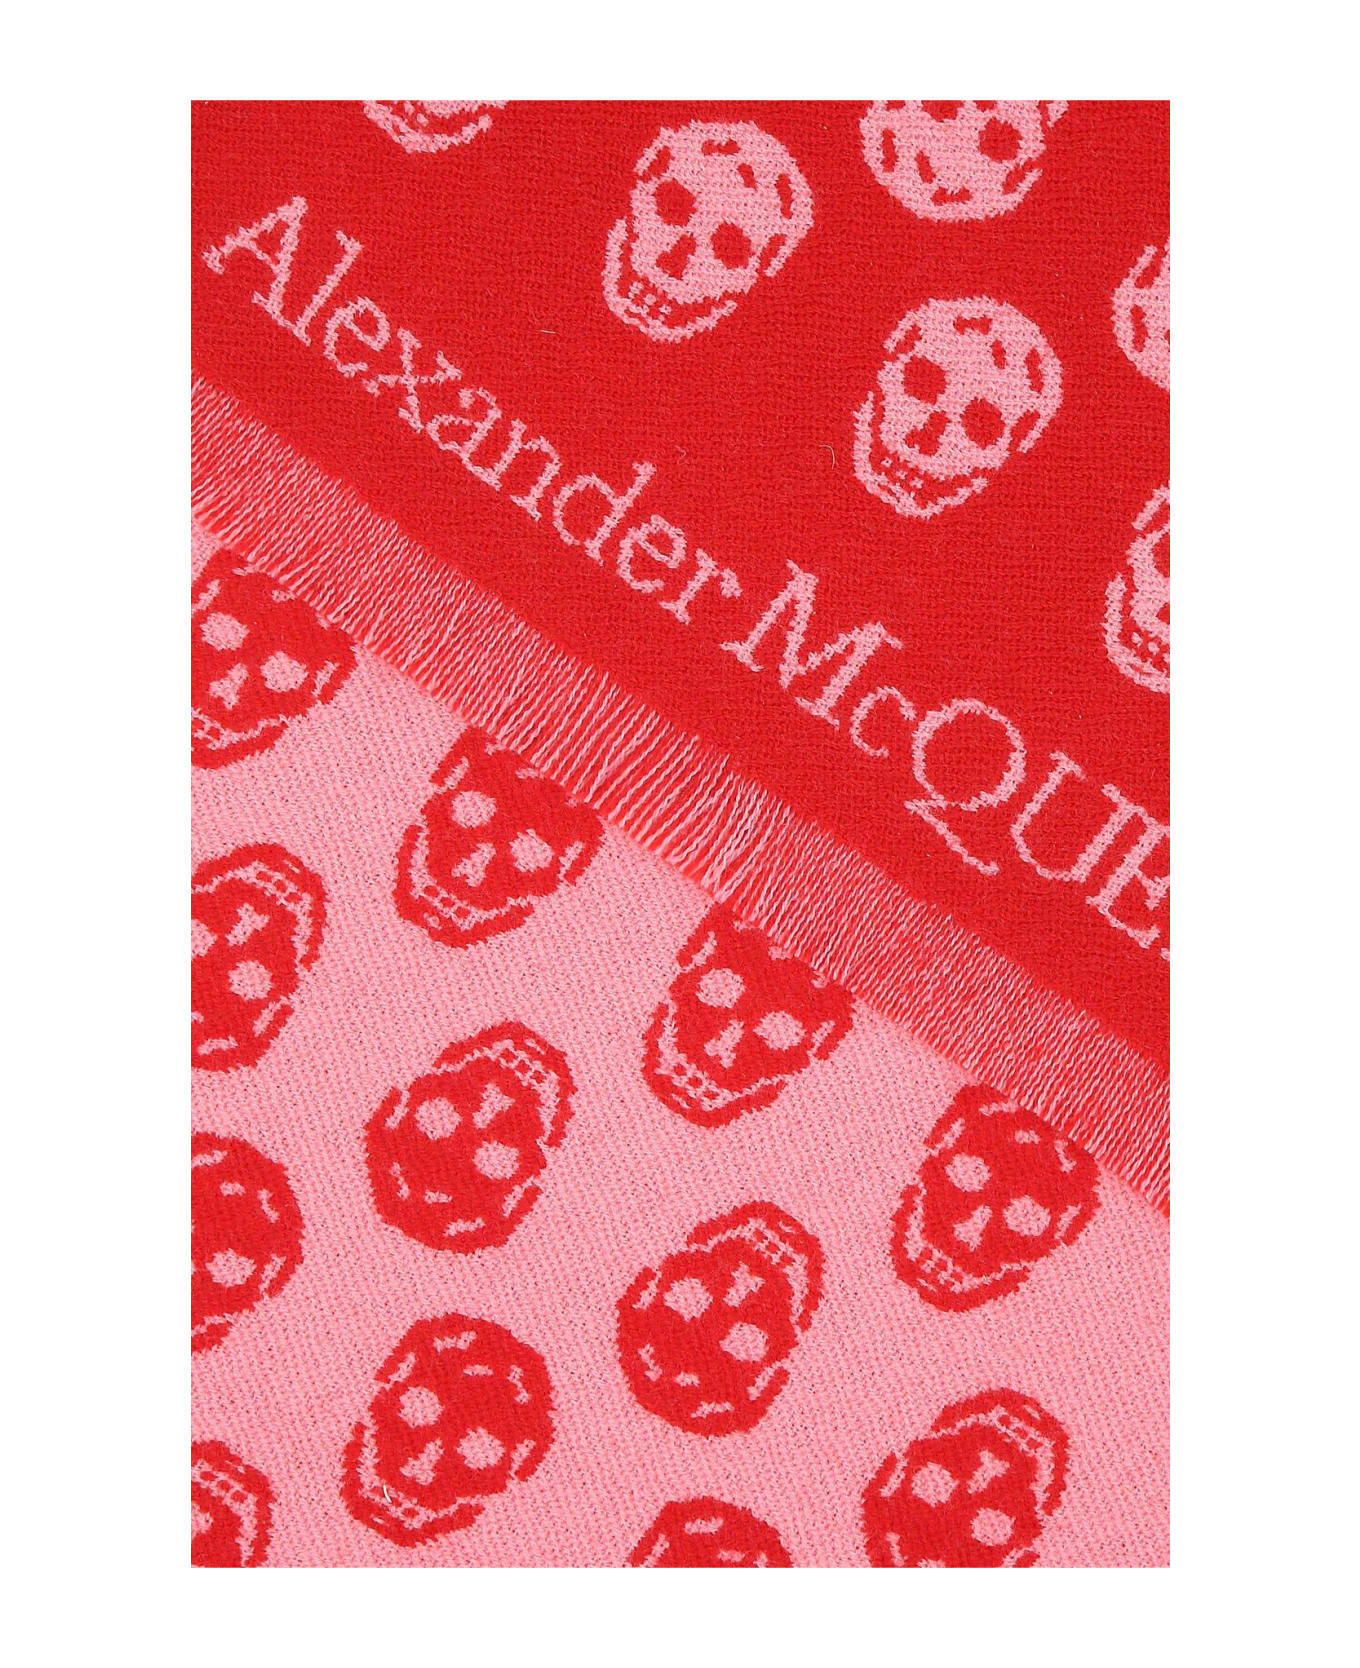 Alexander McQueen Embroidered Wool Scarf - Rosso